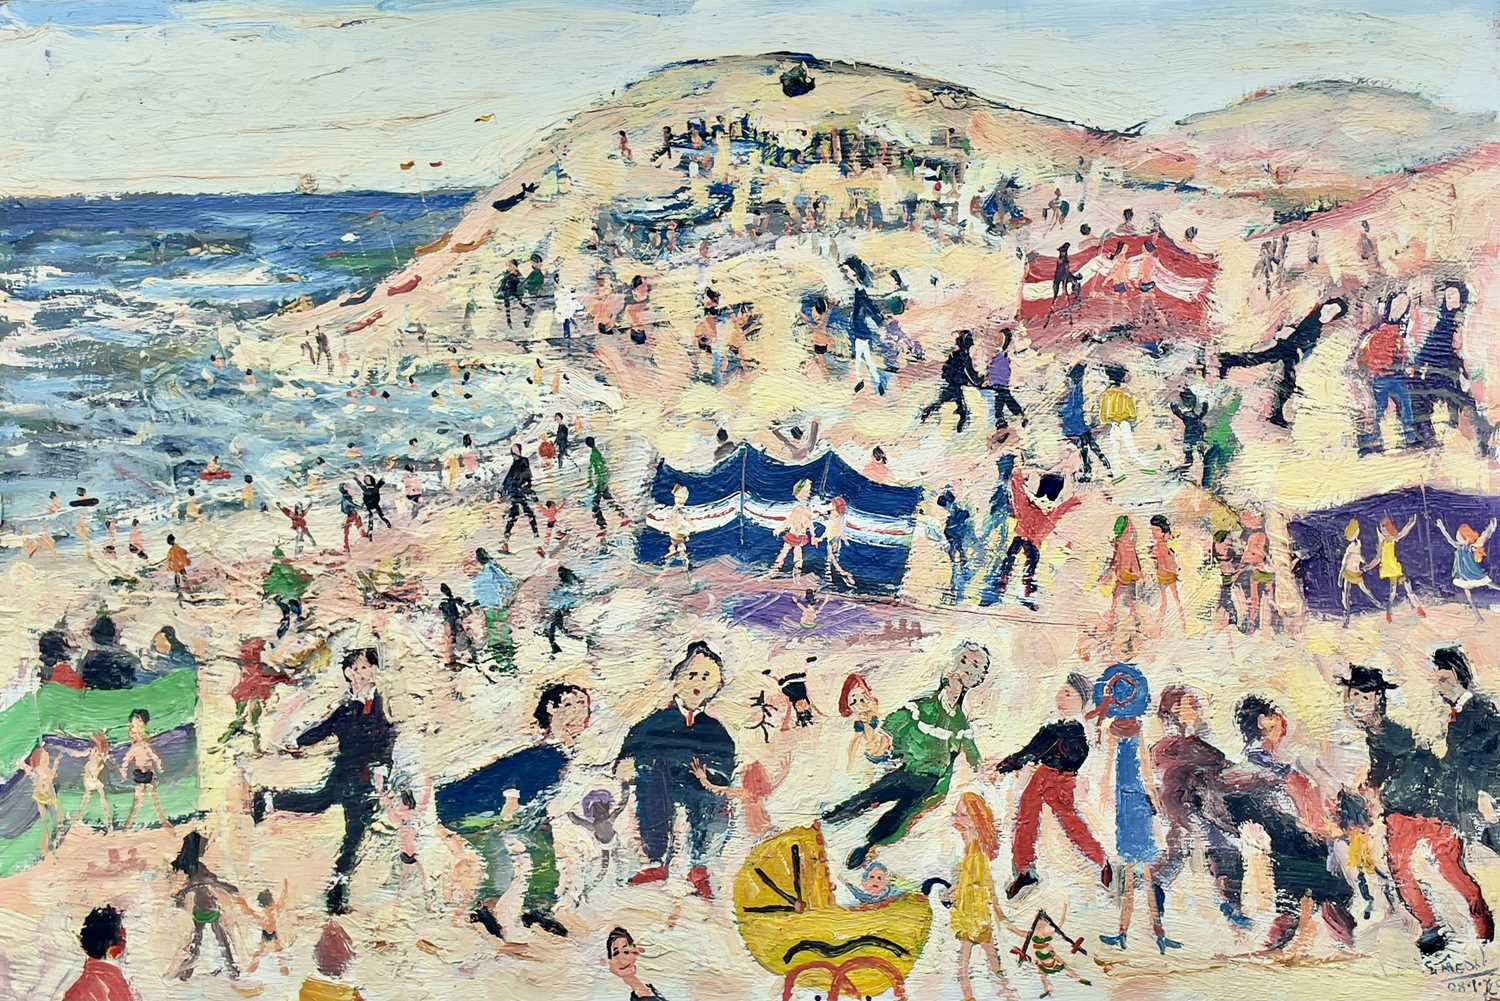 Simeon STAFFORD (1956) Packed Beach and Dunes Oil on board Signed and dated '08 51 x 76cm